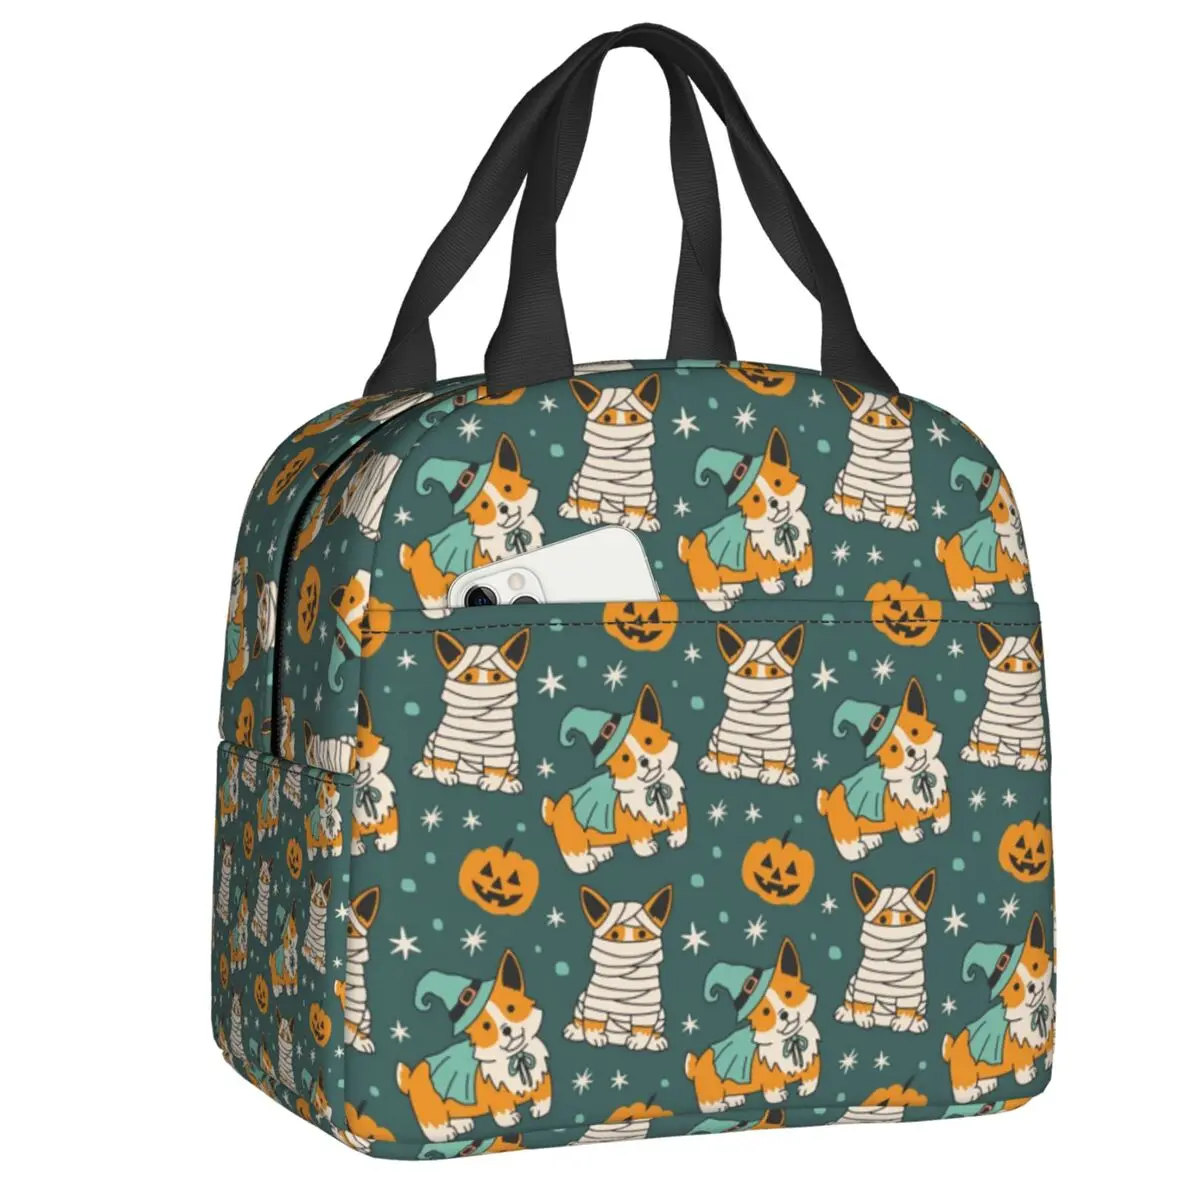 

Halloween Corgi Dog Insulated Lunch Tote Bag for Women Kawaii Puppy Resuable Cooler Thermal Food Lunch Box Kids School Children